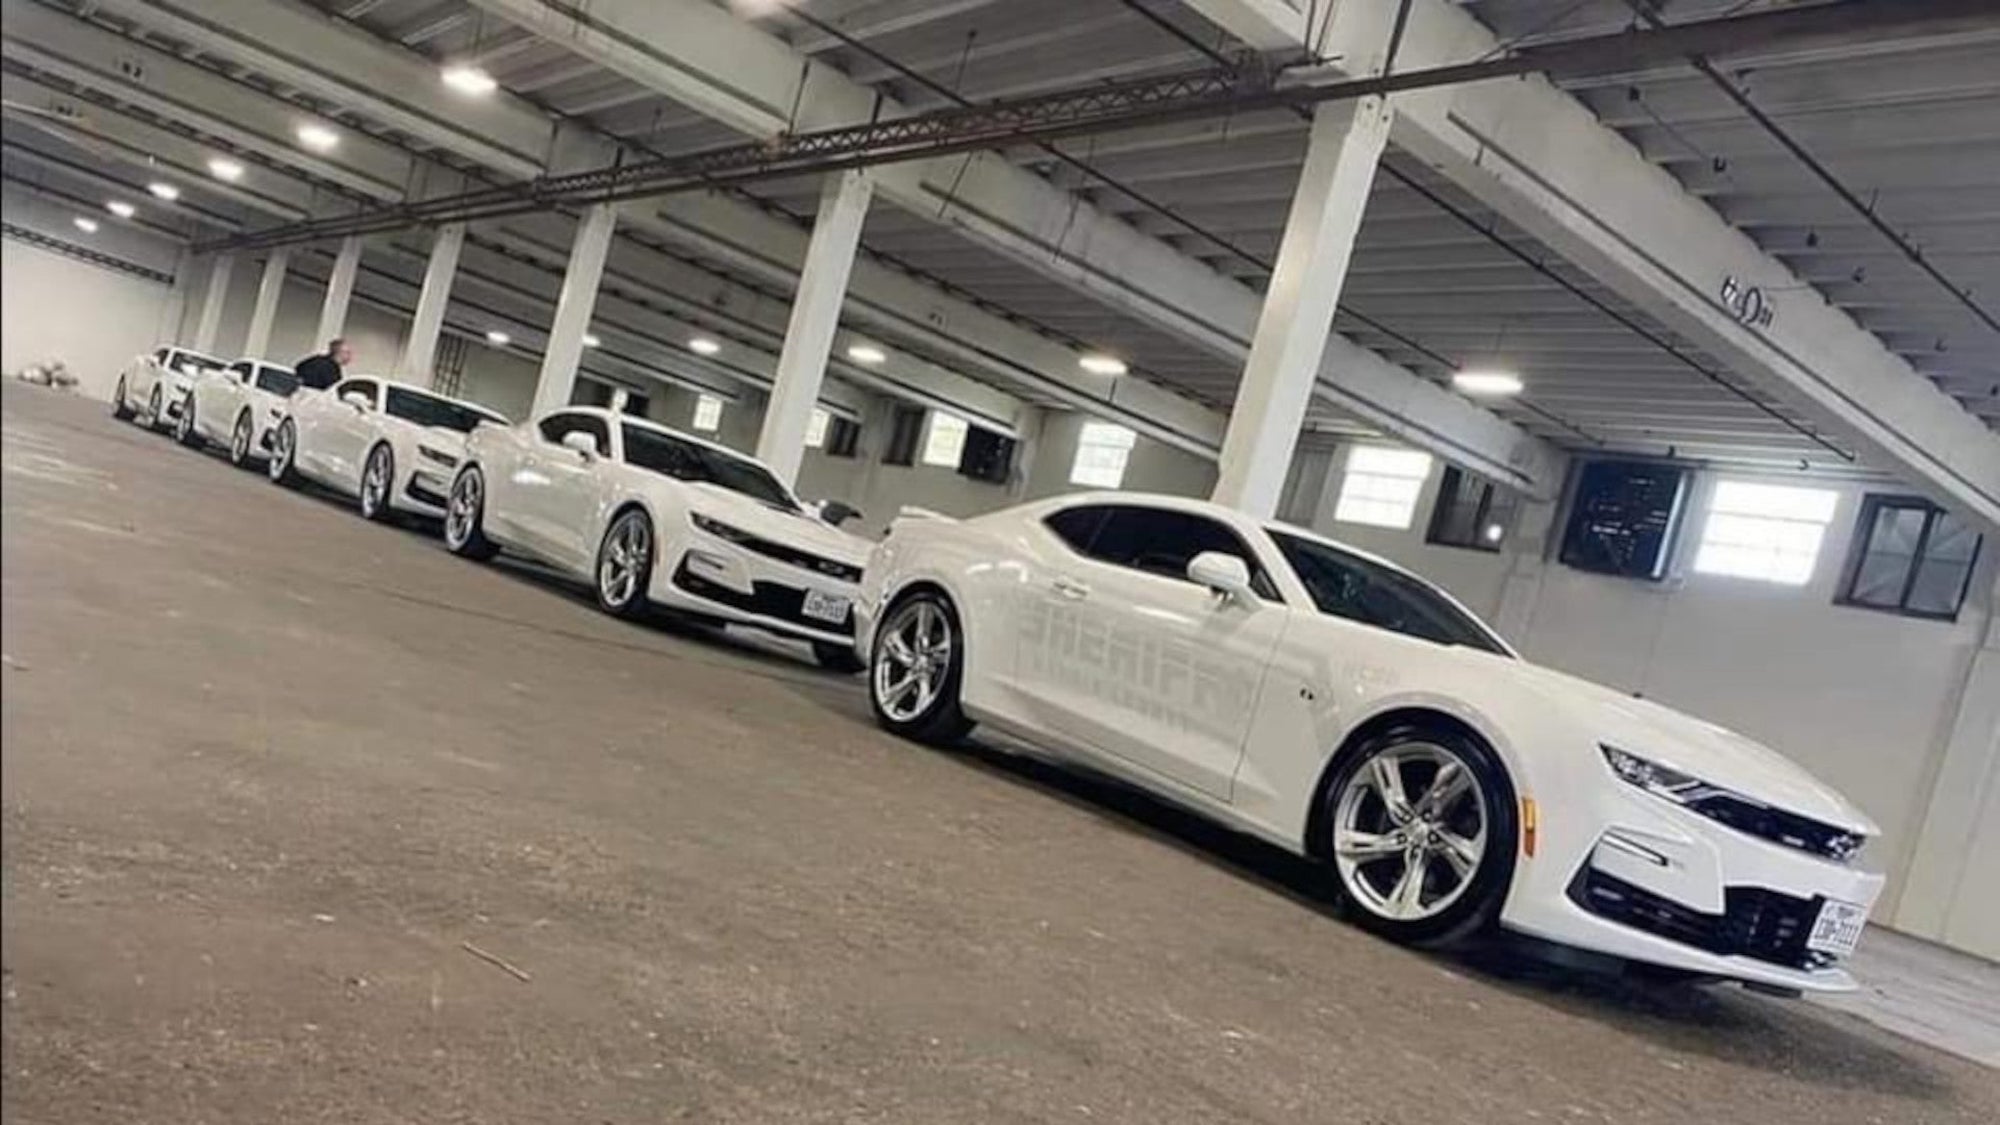 a Texas police department is now using these white on white "ghost" Chevy Camaros instead of more traditional undercover police cars.